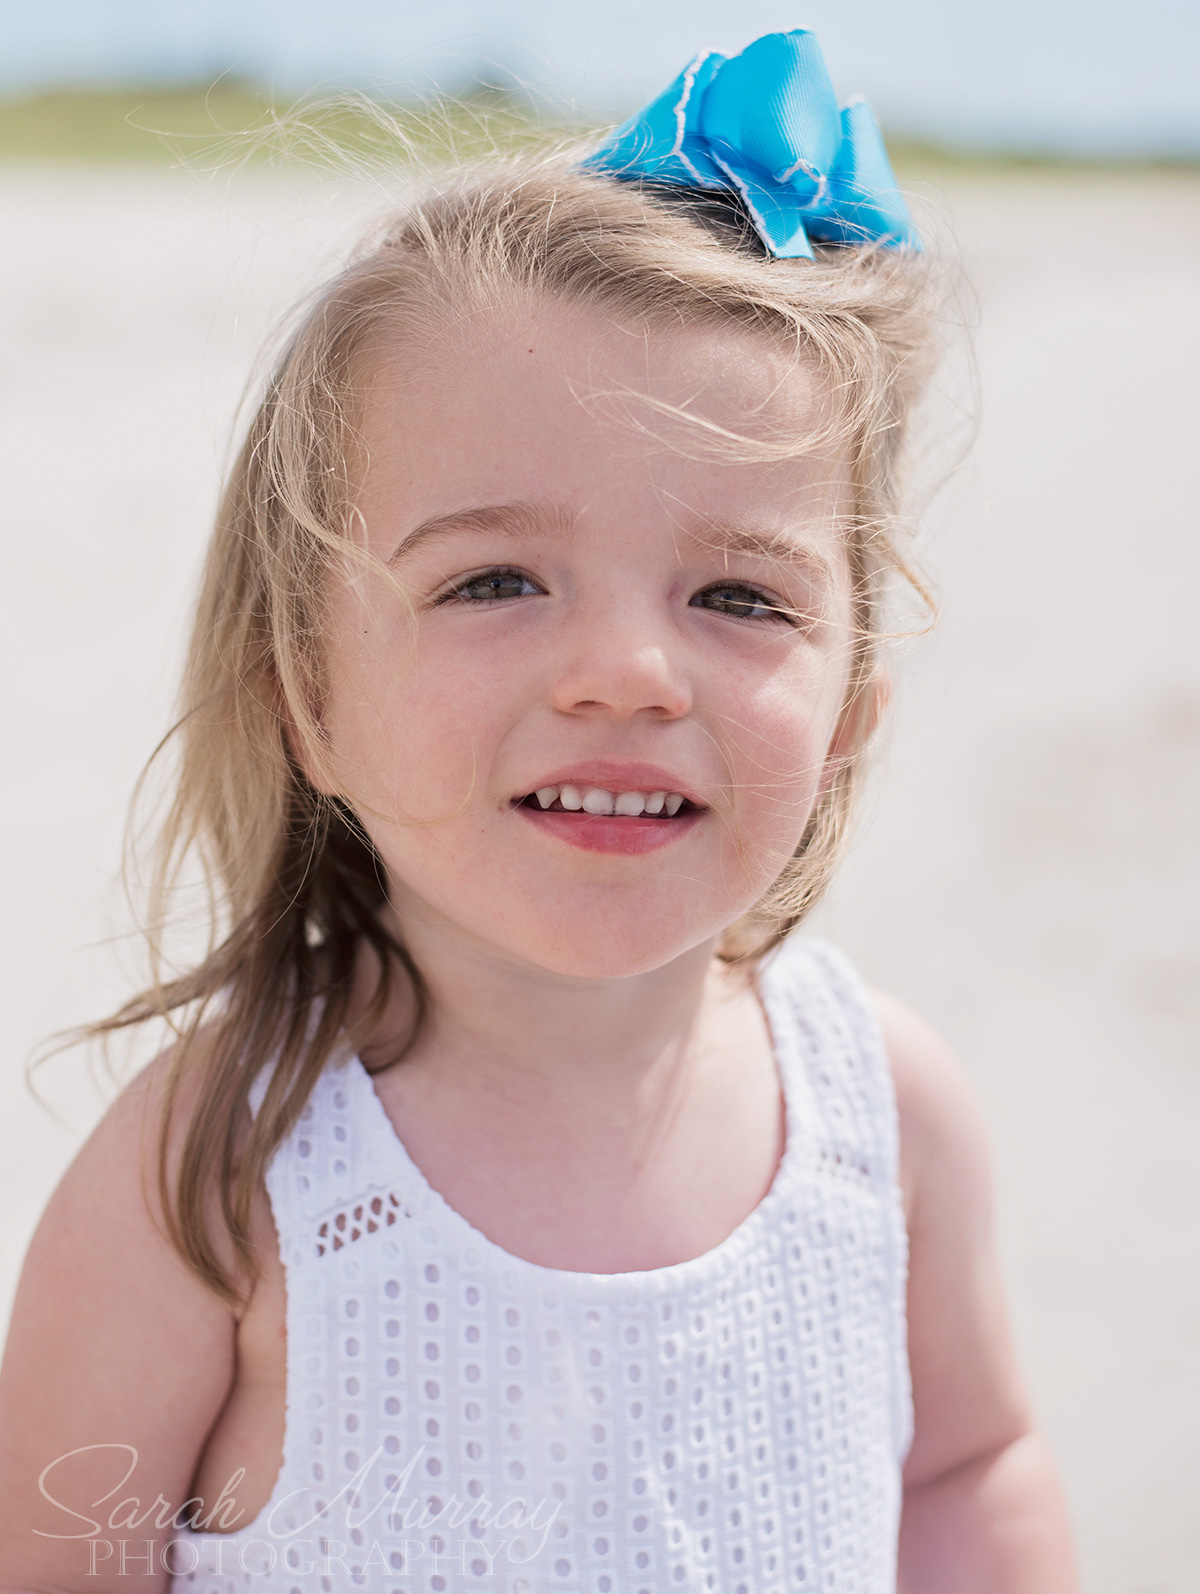 Private Home Family Photography Session on the Beach in Hyannisport, Massachusetts - Sarah Murray Photography